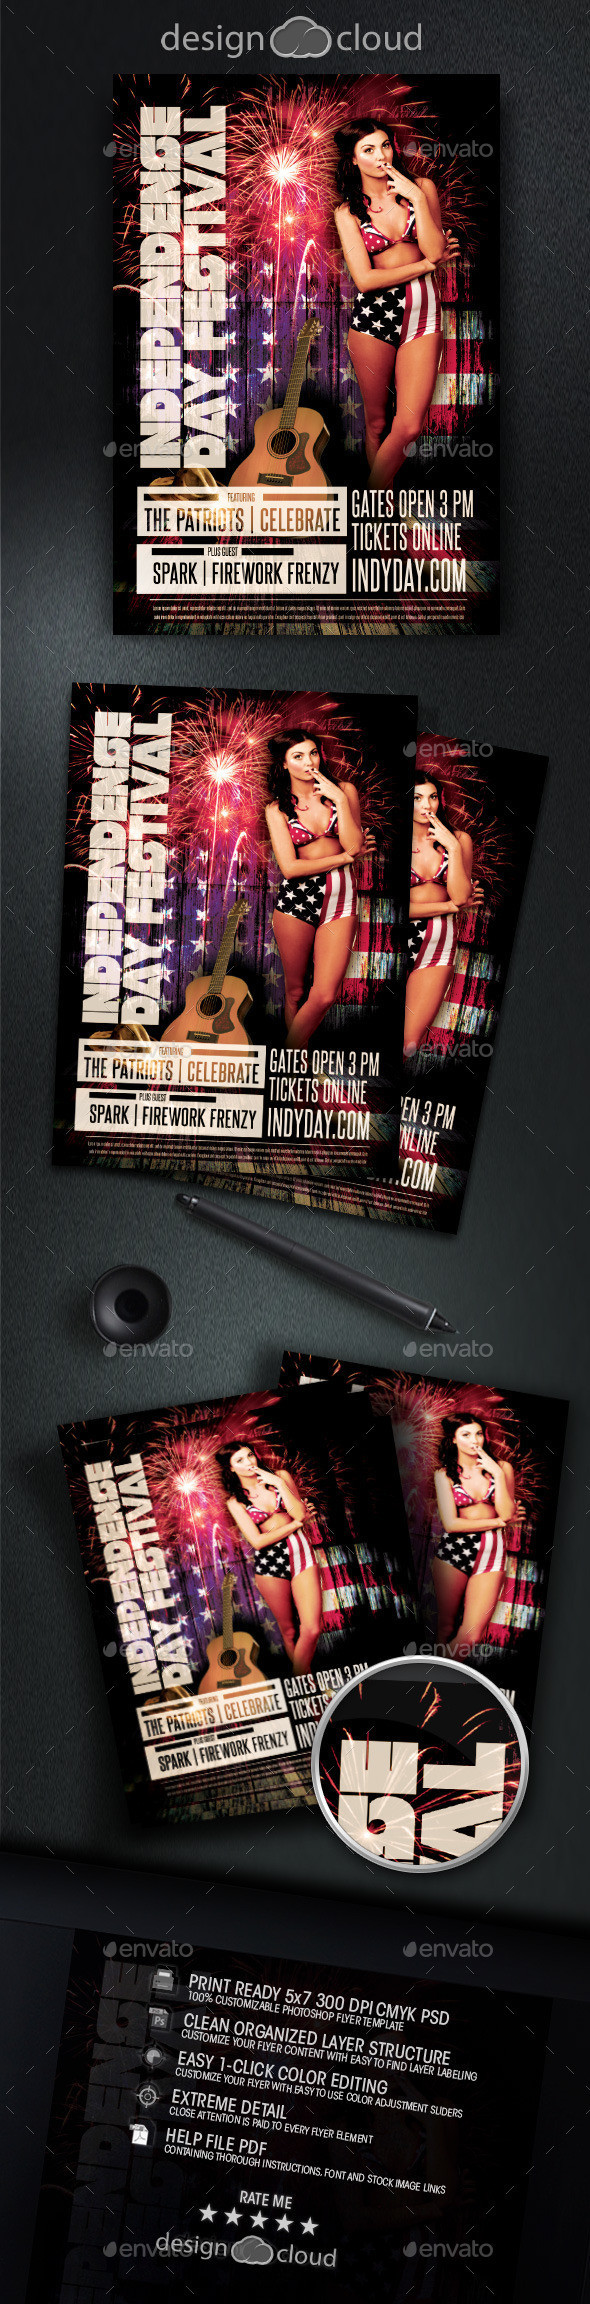 Preview independence day july 4 flyer template